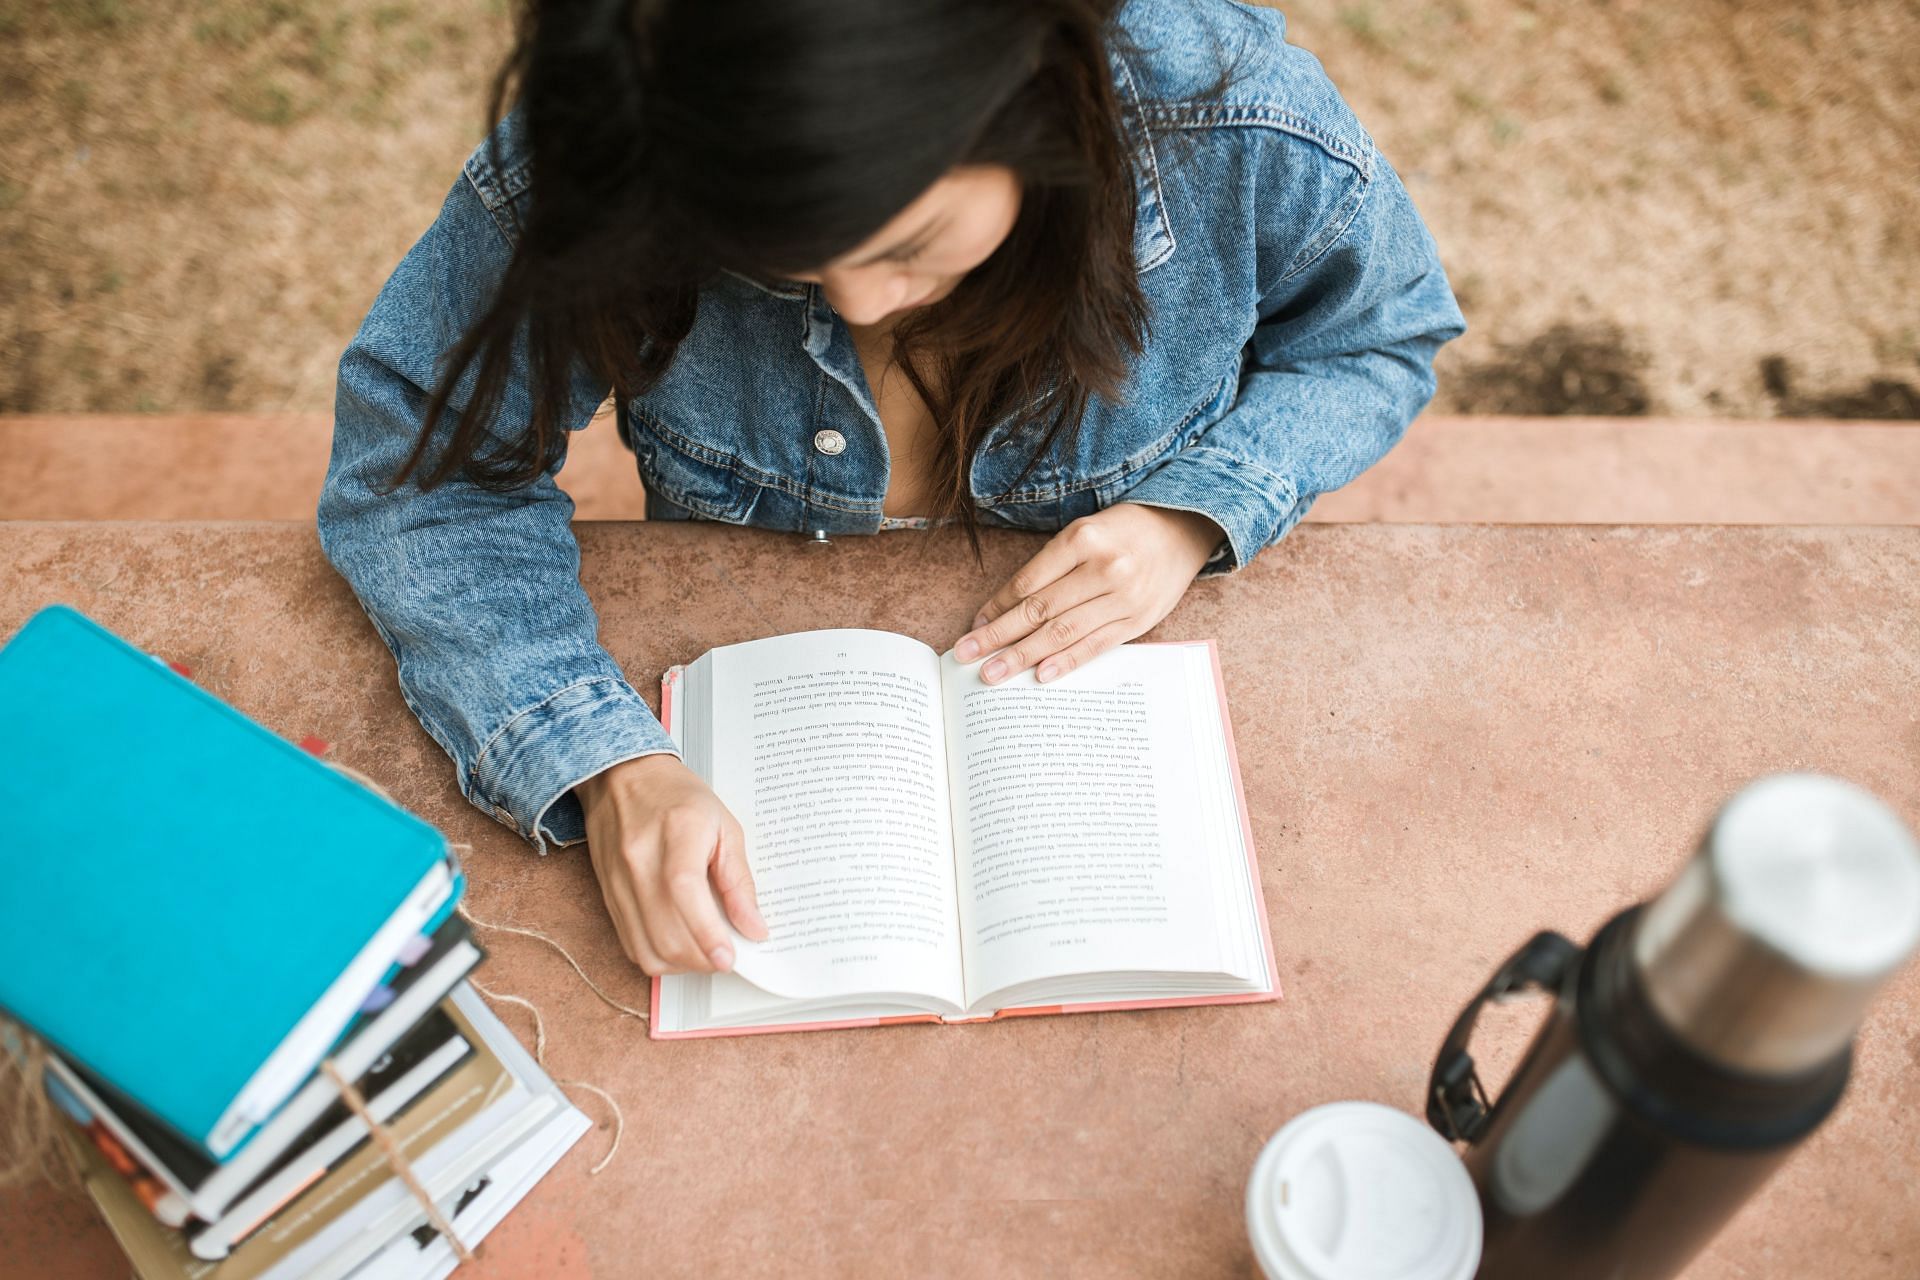 Reading a book in 75 Hard Challenge. (Image via Pexels/ Rdne Stock Project)